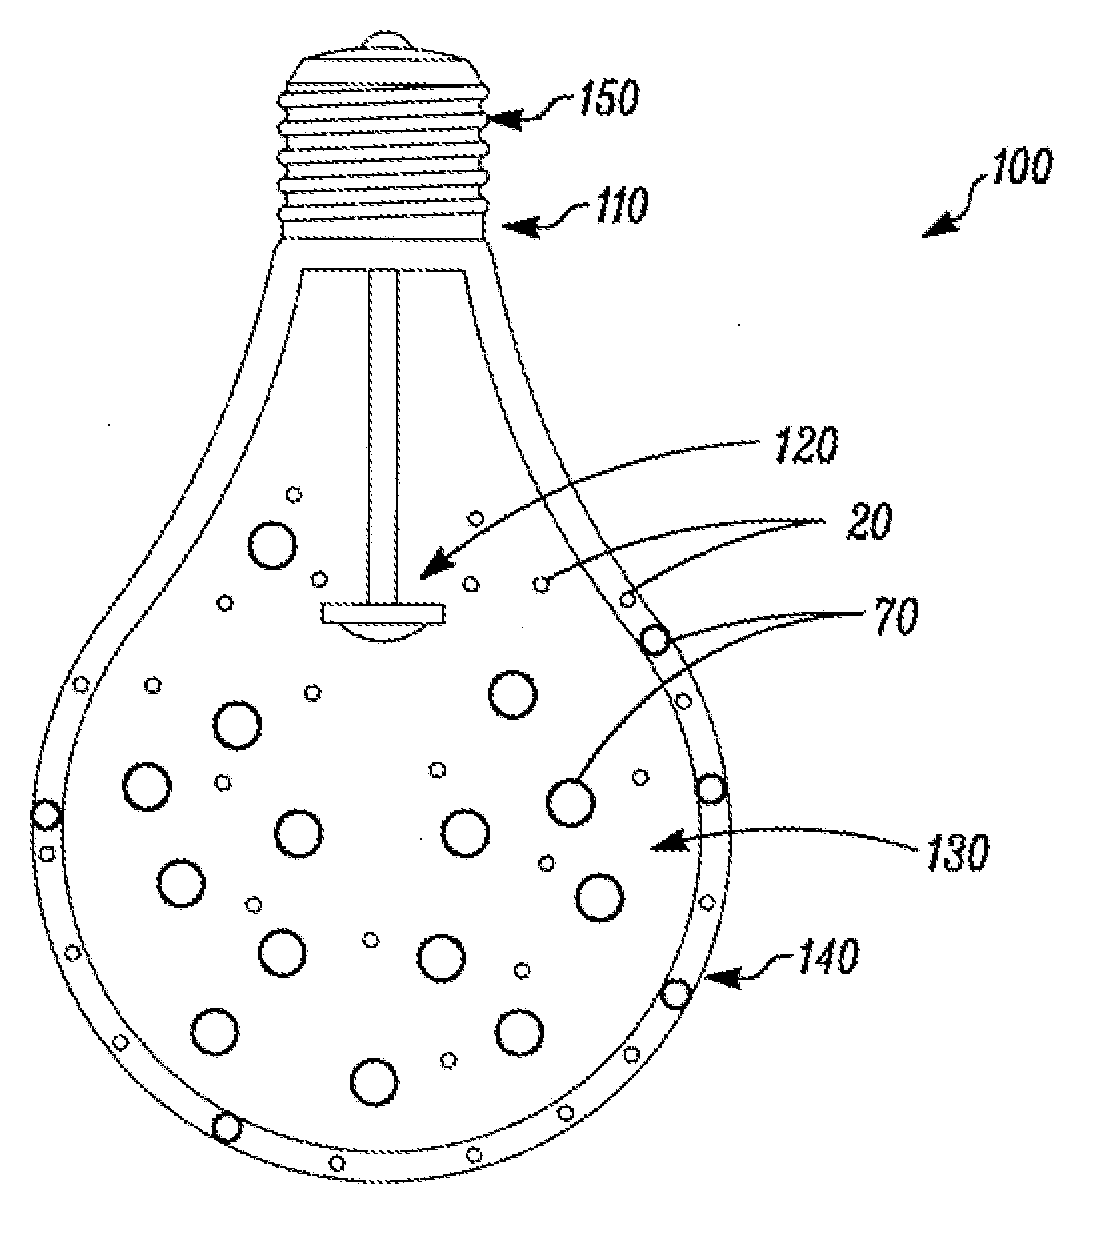 Method of light dispersion and preferential scattering of certain wavelengths of light-emitting diodes and bulbs constructed therefrom